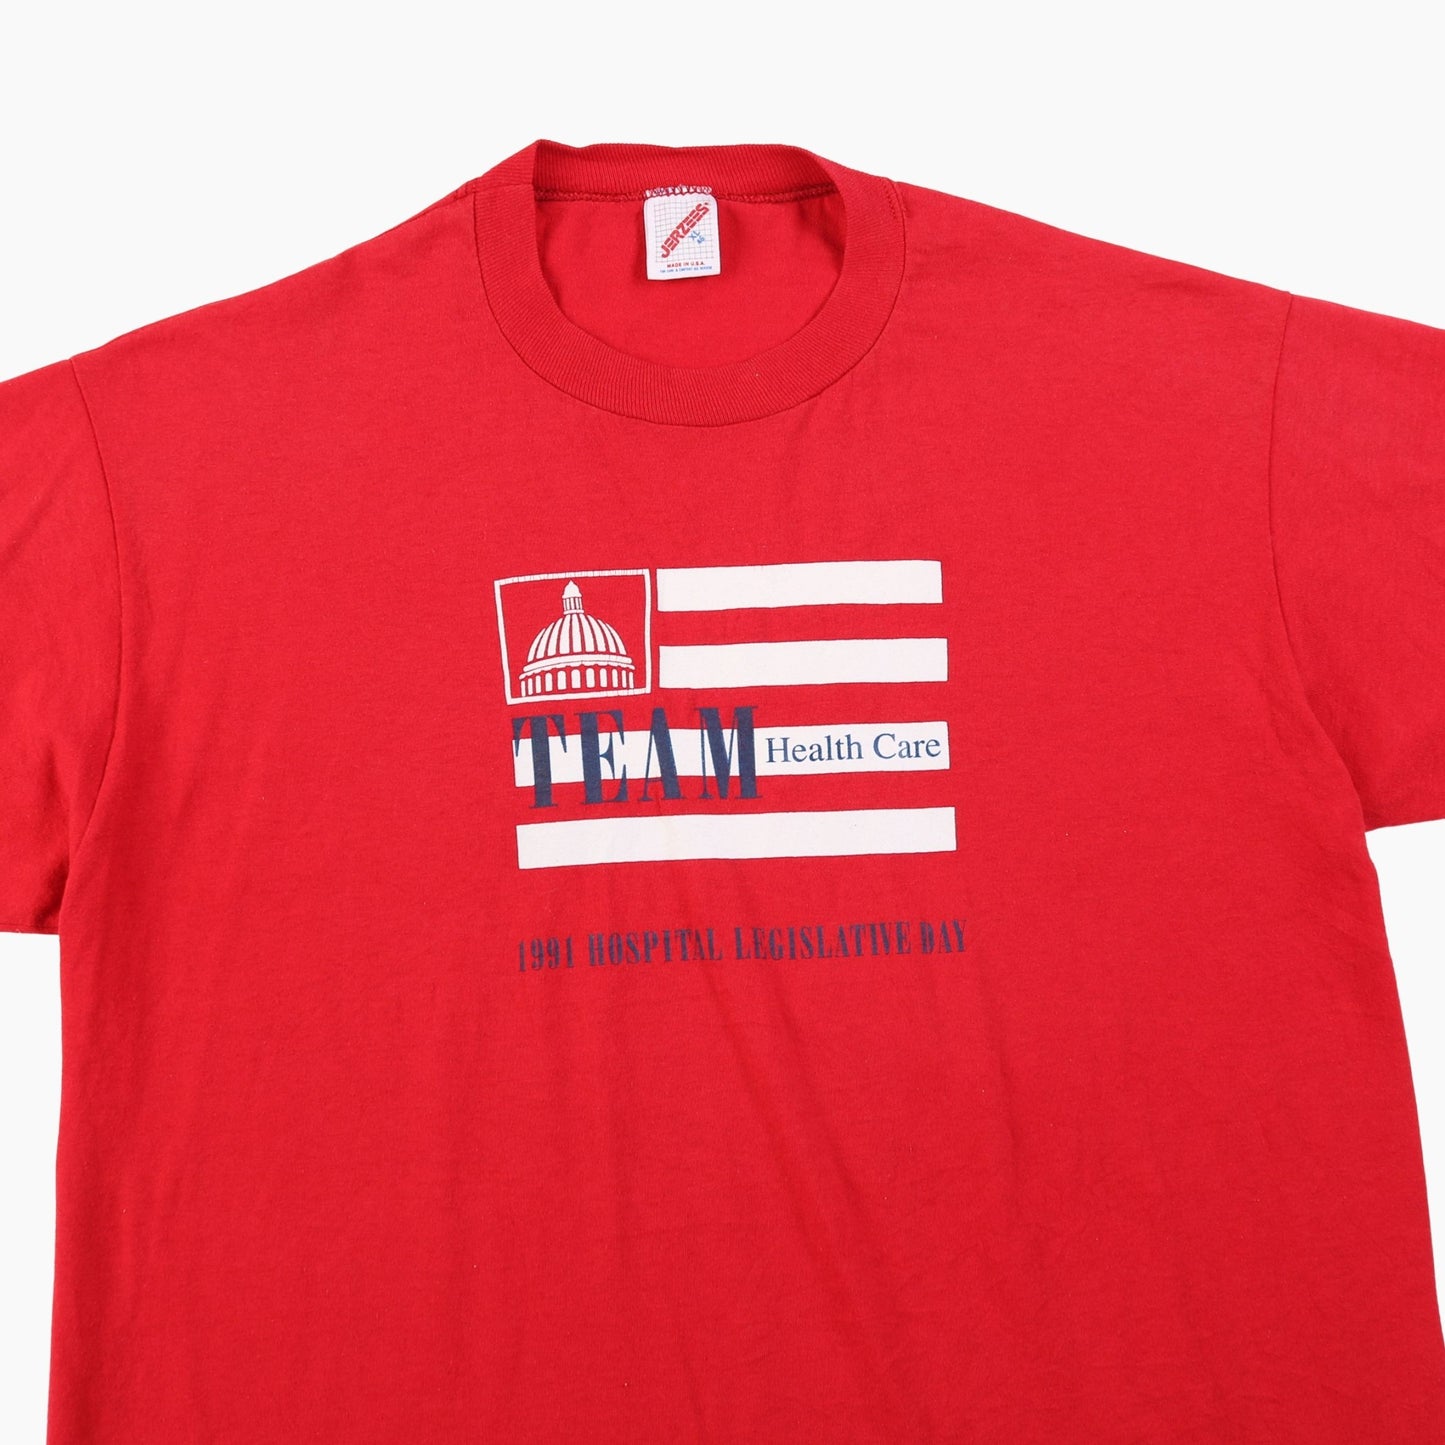 'Team Healthcare 91' T-Shirt - American Madness